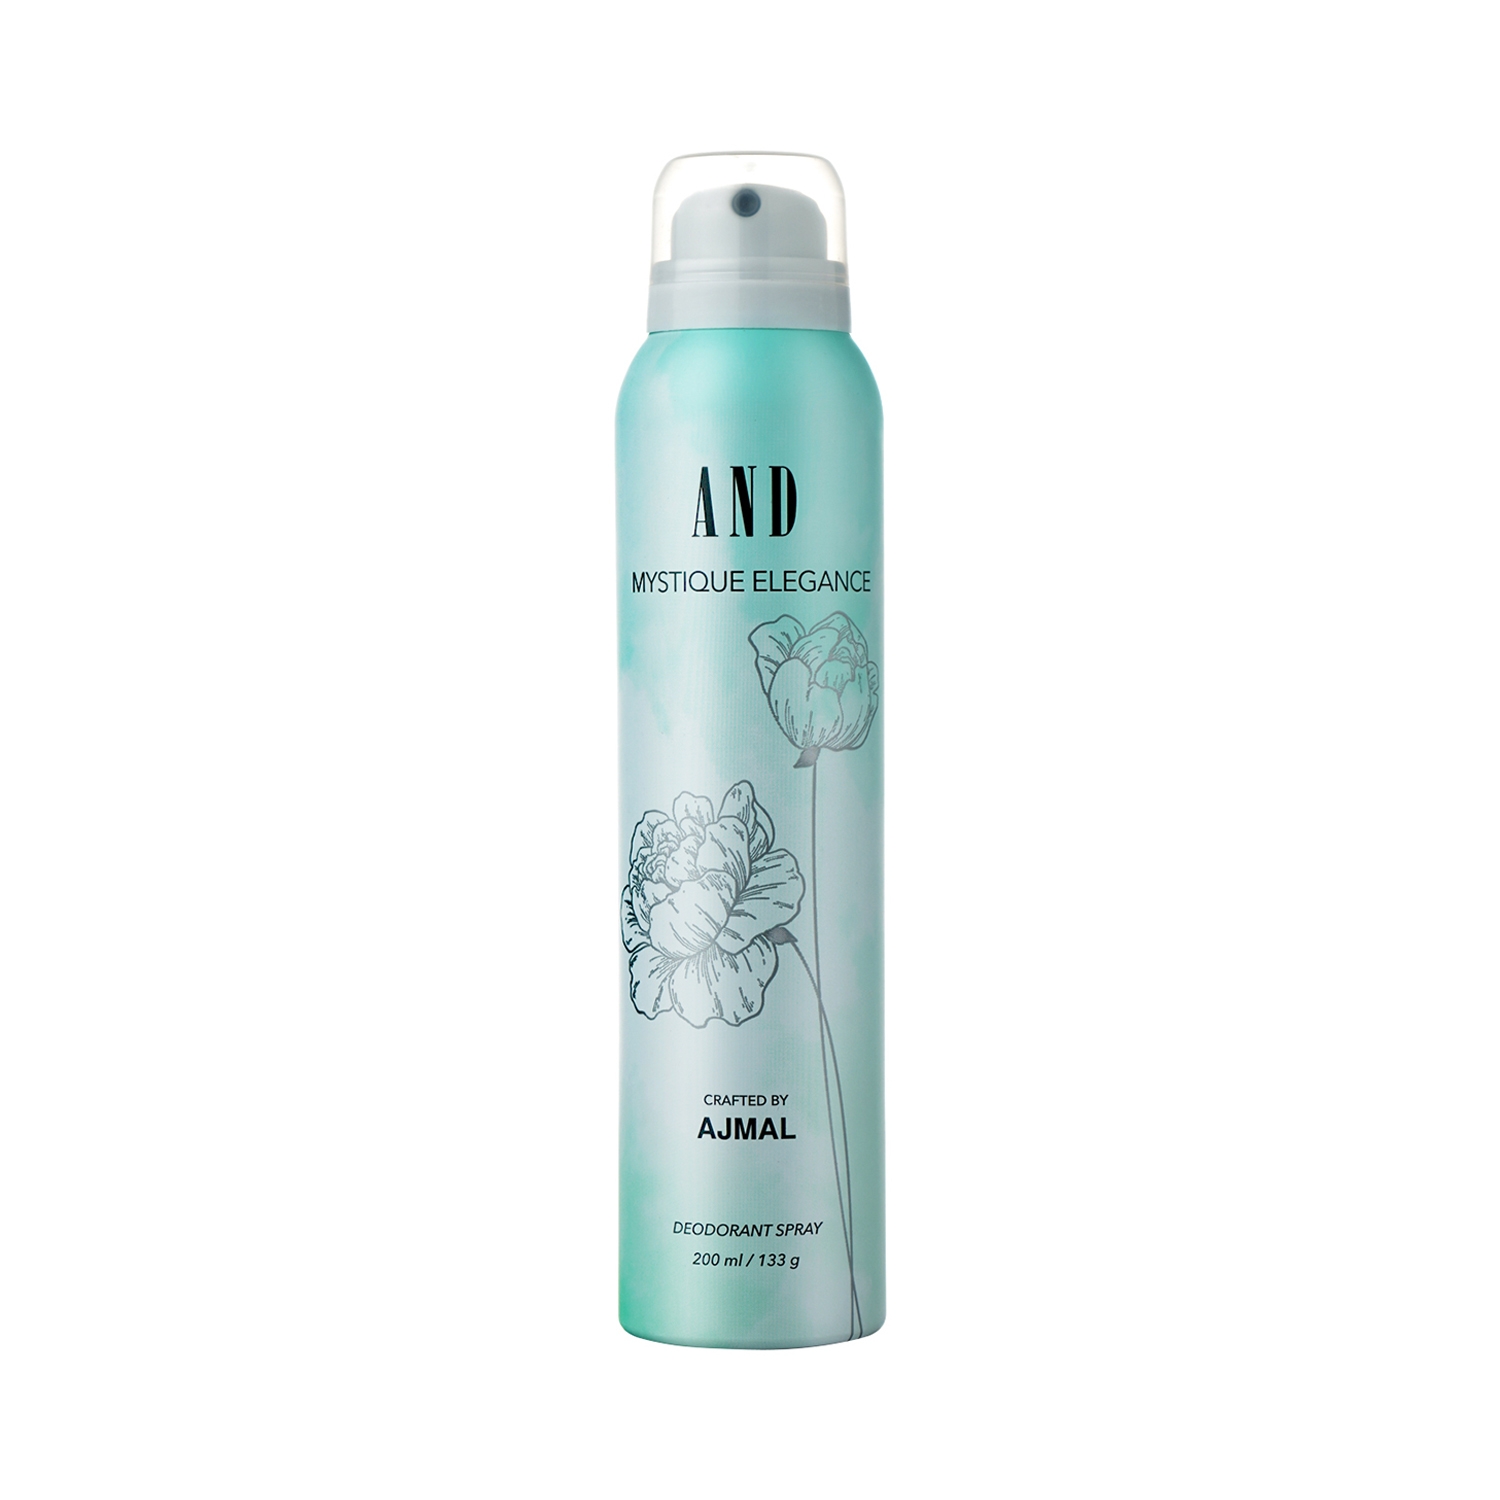 AND | AND Mystique Elegance Deodorant Body Spray Gift for Women (200ml)